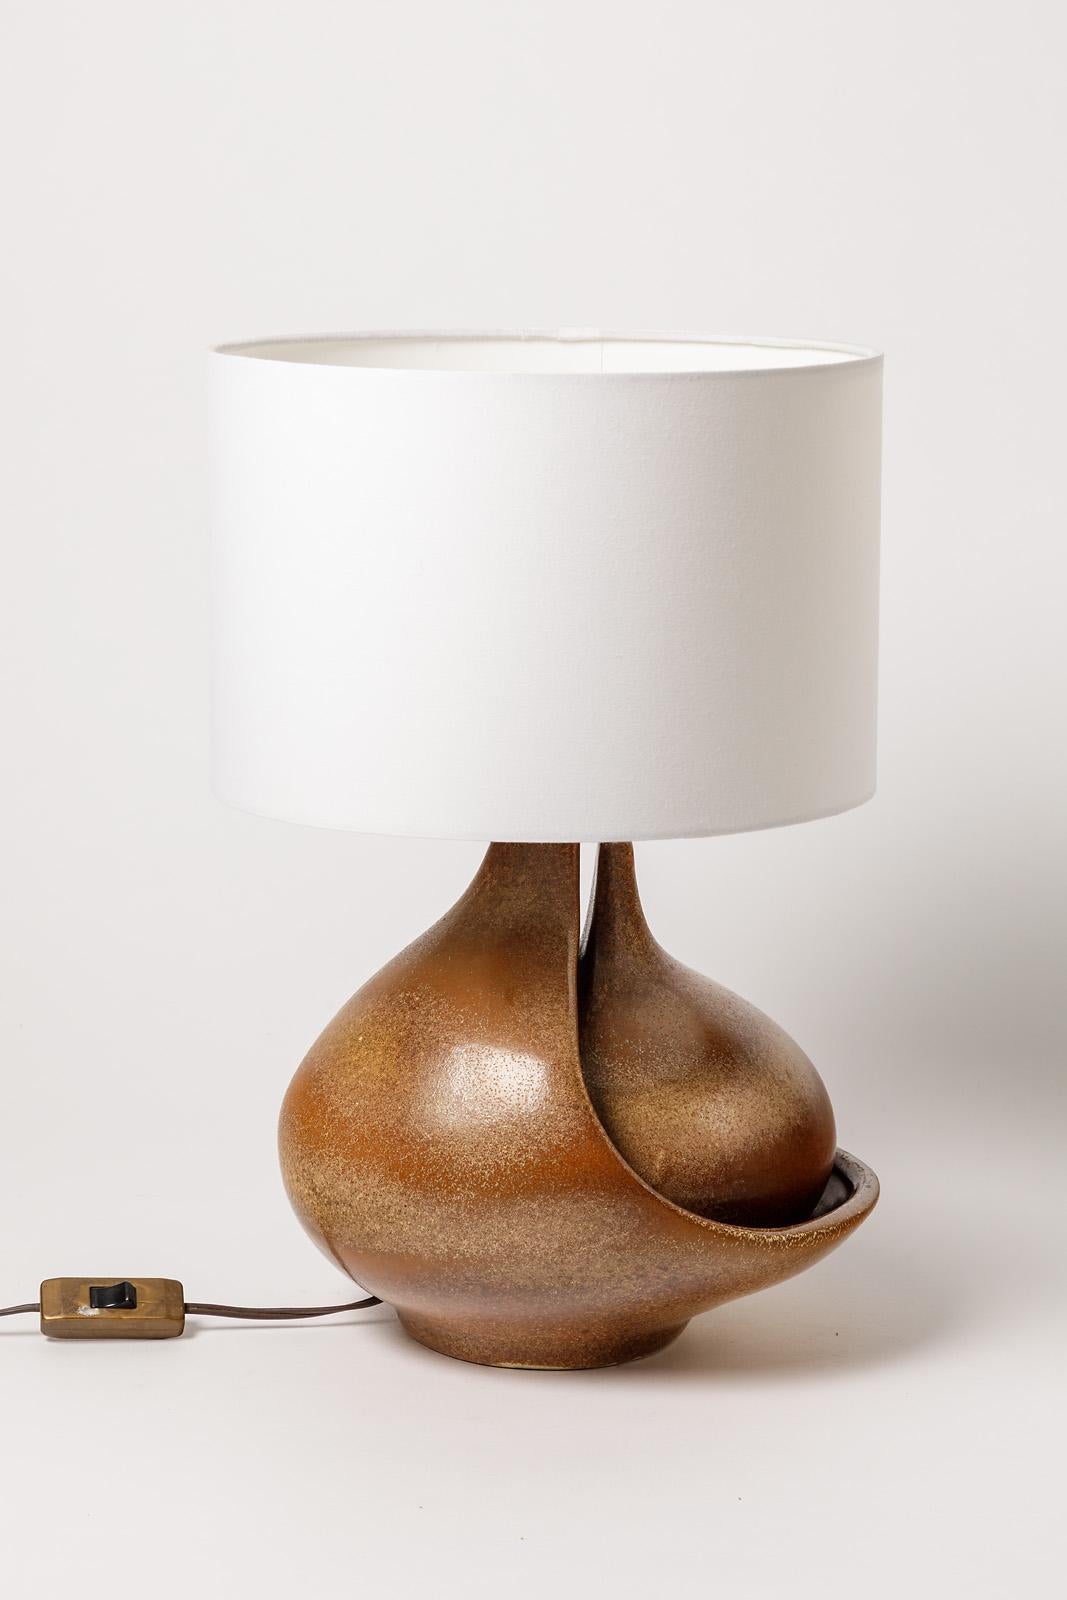 Fred Stocker

Original and elegant ceramic table lamp in two parts.

Realized circa 1970, signed under the base.

Elegant light brown ceramic glaze color.

Sold without lampshade

Ceramic dimensions: Height 30cm, large 26cm, depth